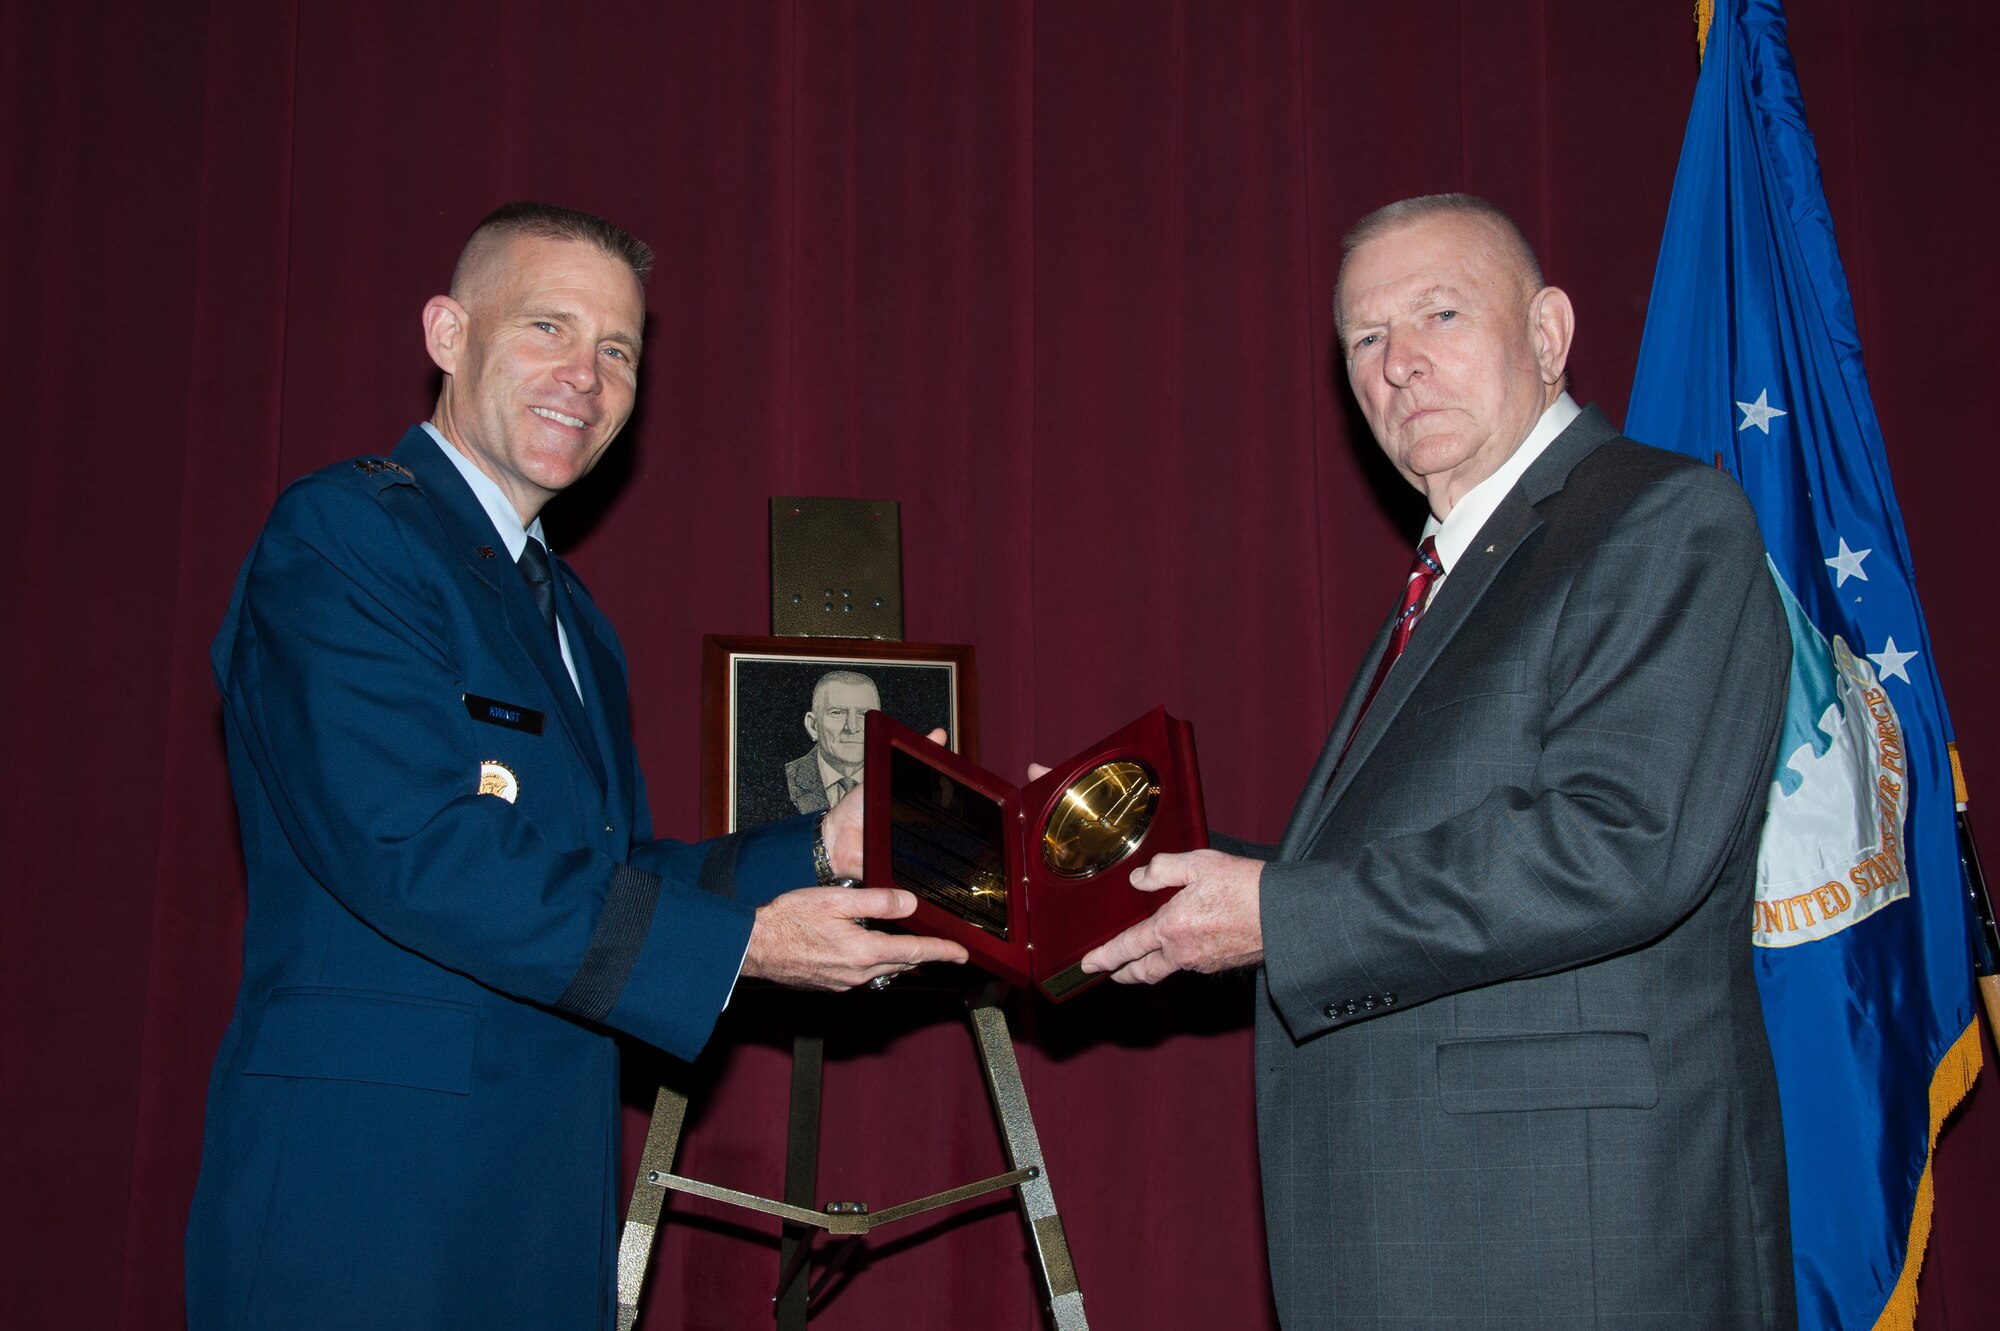 Lt. Gen. Steven Kwast, Air University commander, presents Gene Kranz with the Air Force ROTC Distinguished Alumni Award during a ceremony Dec. 16, 2014, at Maxwell Air Force Base, Alabama. Kranz, who received his commission through the ROTC program at Saint Louis University in 1954, was the flight director for the Apollo 13 mission in April 1970 that ended successfully following an explosion aboard the space capsule. Kranz was selected for the distinction because of his exceptional meritorious service to the Air Force and NASA for more than 40 years. (US Air Force photo by Melanie Rodgers Cox/Released)